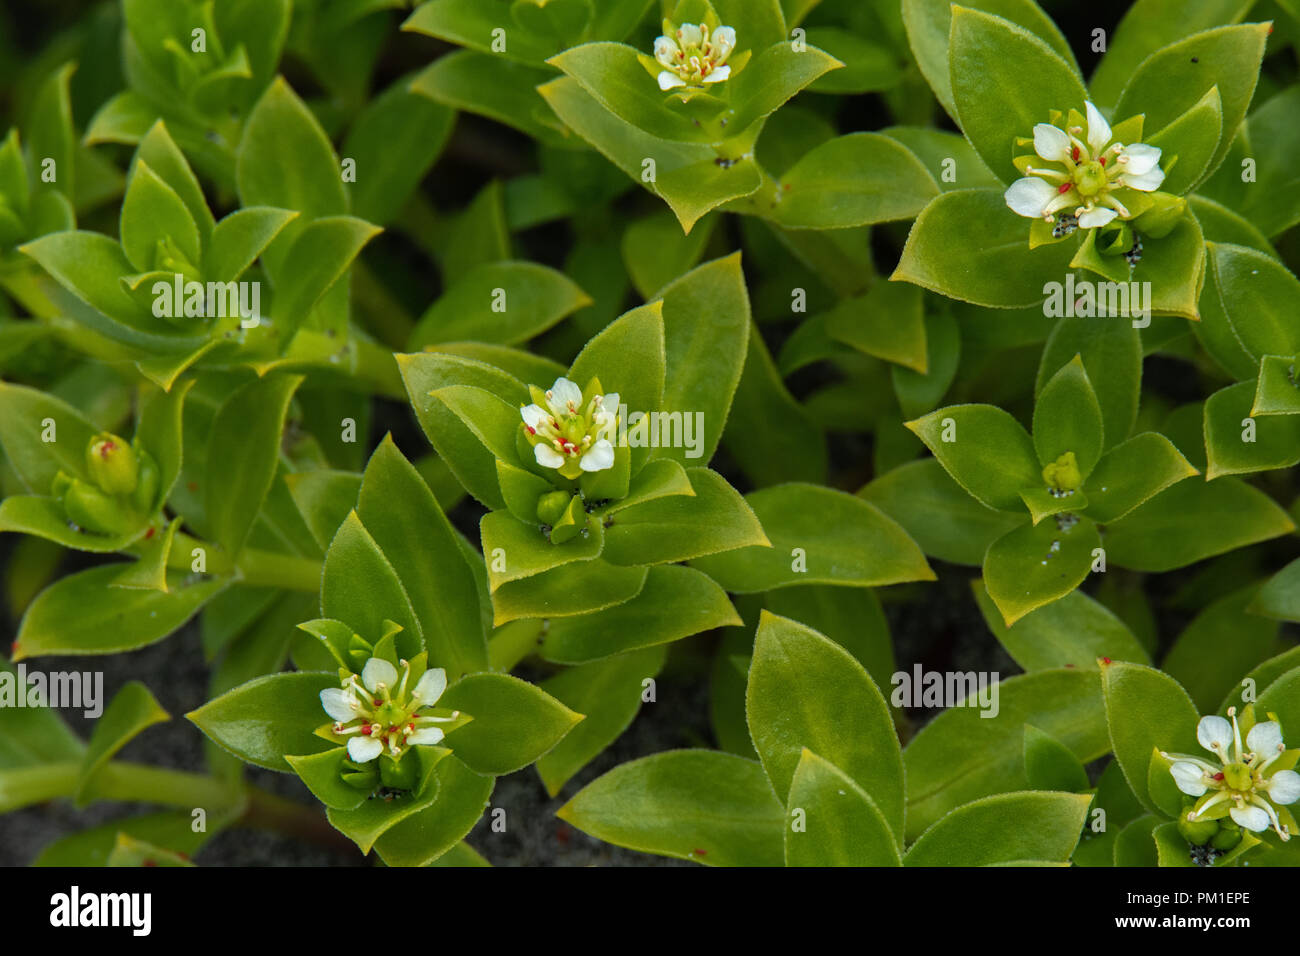 Five white petals spread apart are the sea chickweed's flower in full bloom and stand out against the four green leave pattern of the rest of the plan Stock Photo